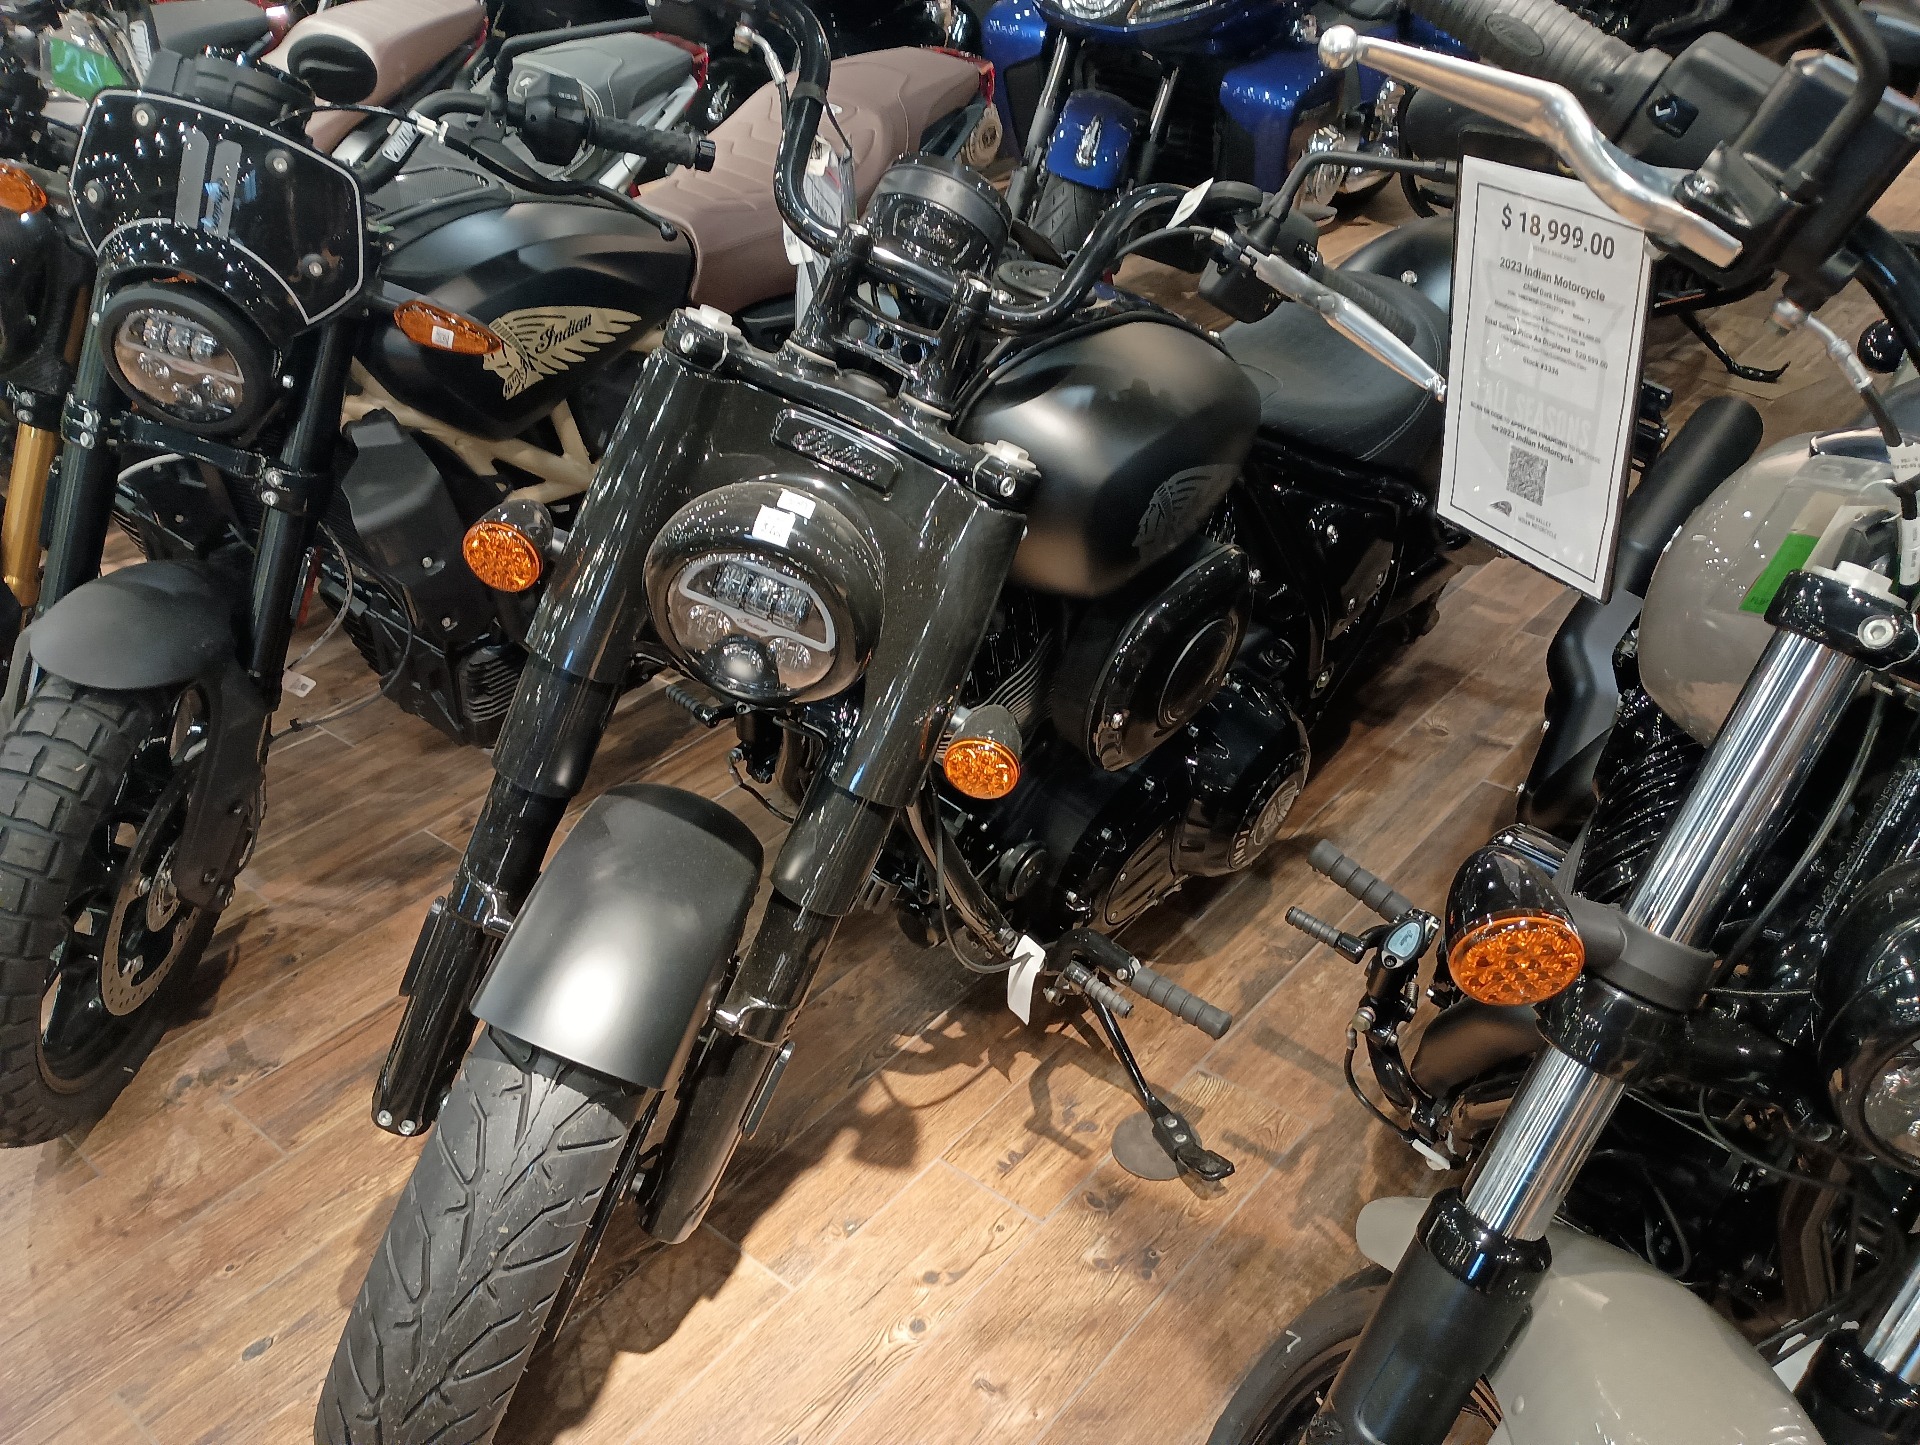 2023 Indian Motorcycle Chief Bobber Dark Horse® in Mineral Wells, West Virginia - Photo 1